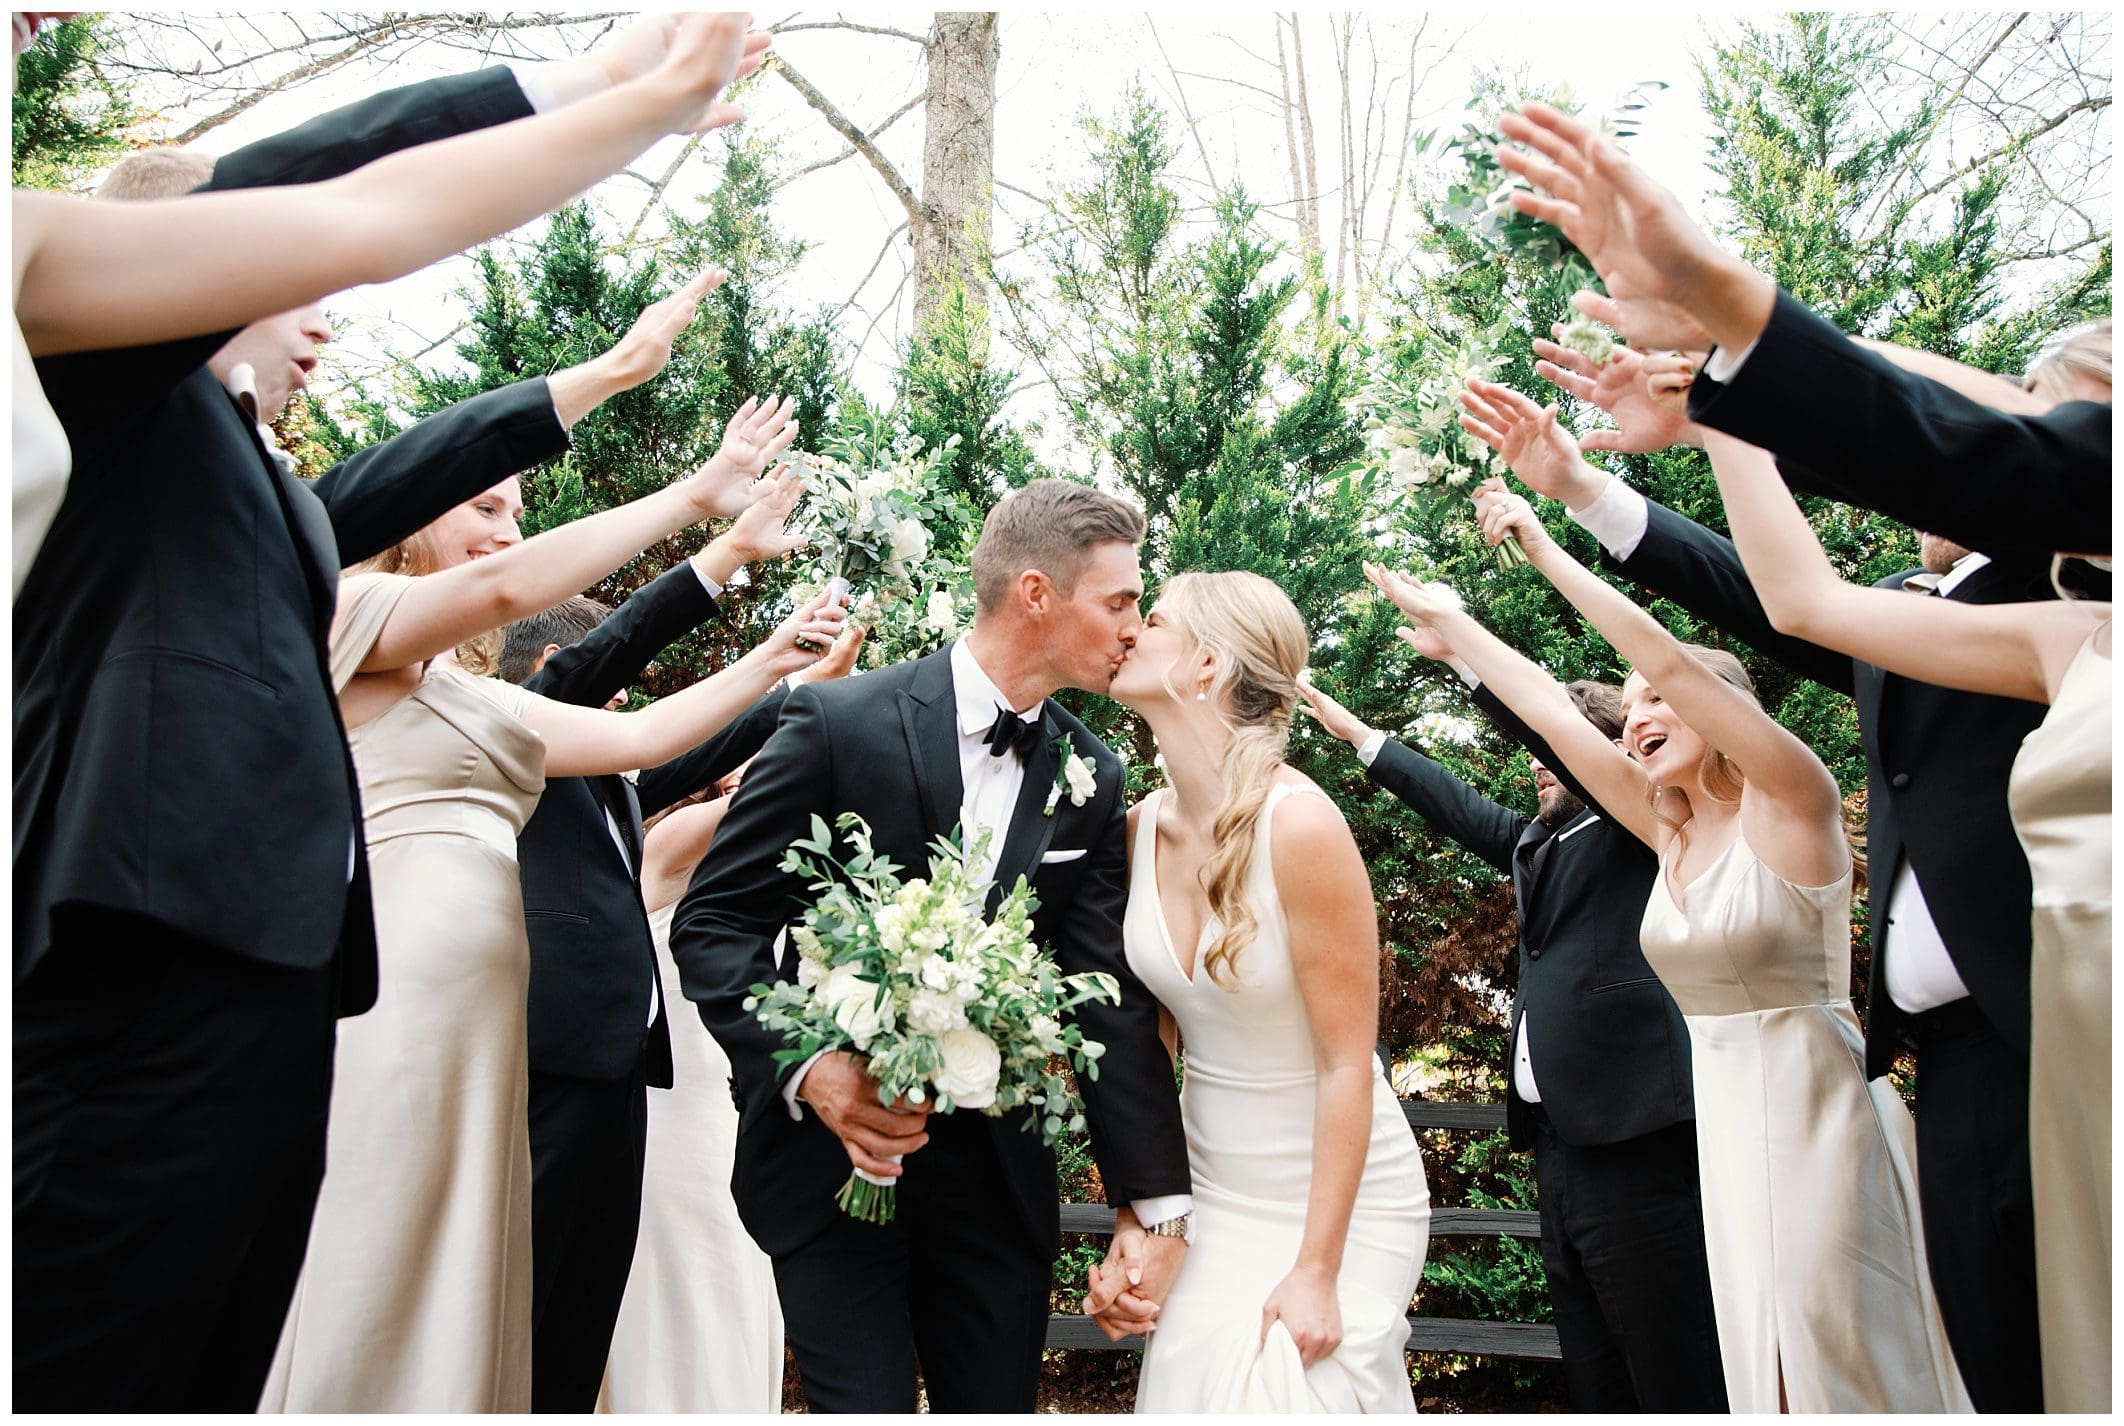 A fall wedding party at Crest Center joyously raises their hands in the air.